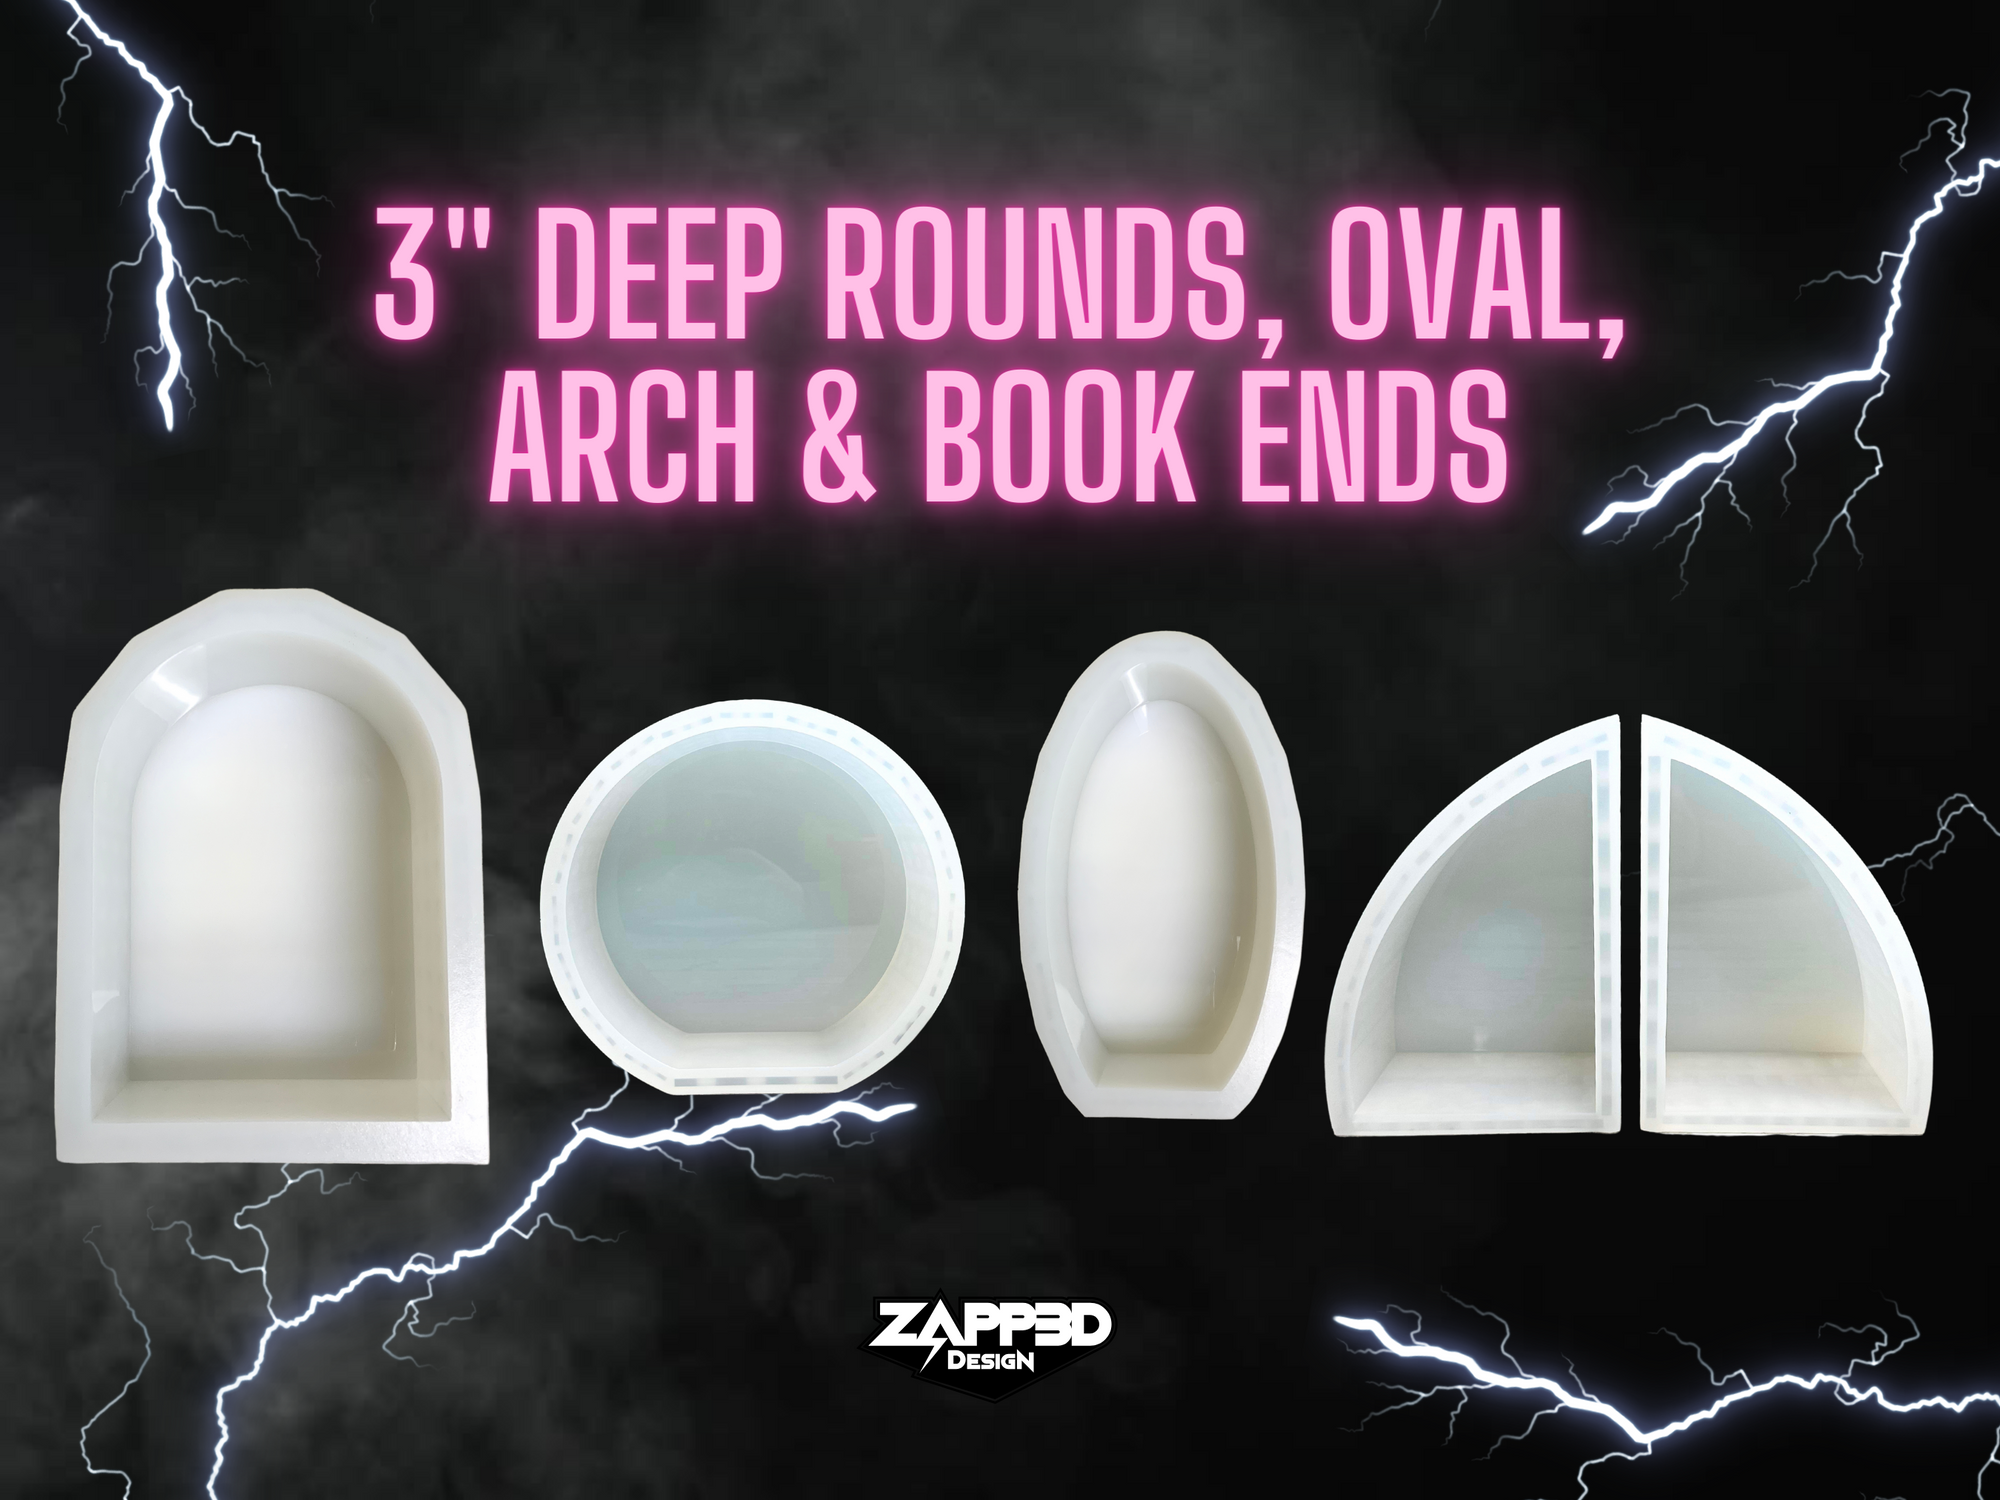 Deep Round, Oval, Arch & Book Ends